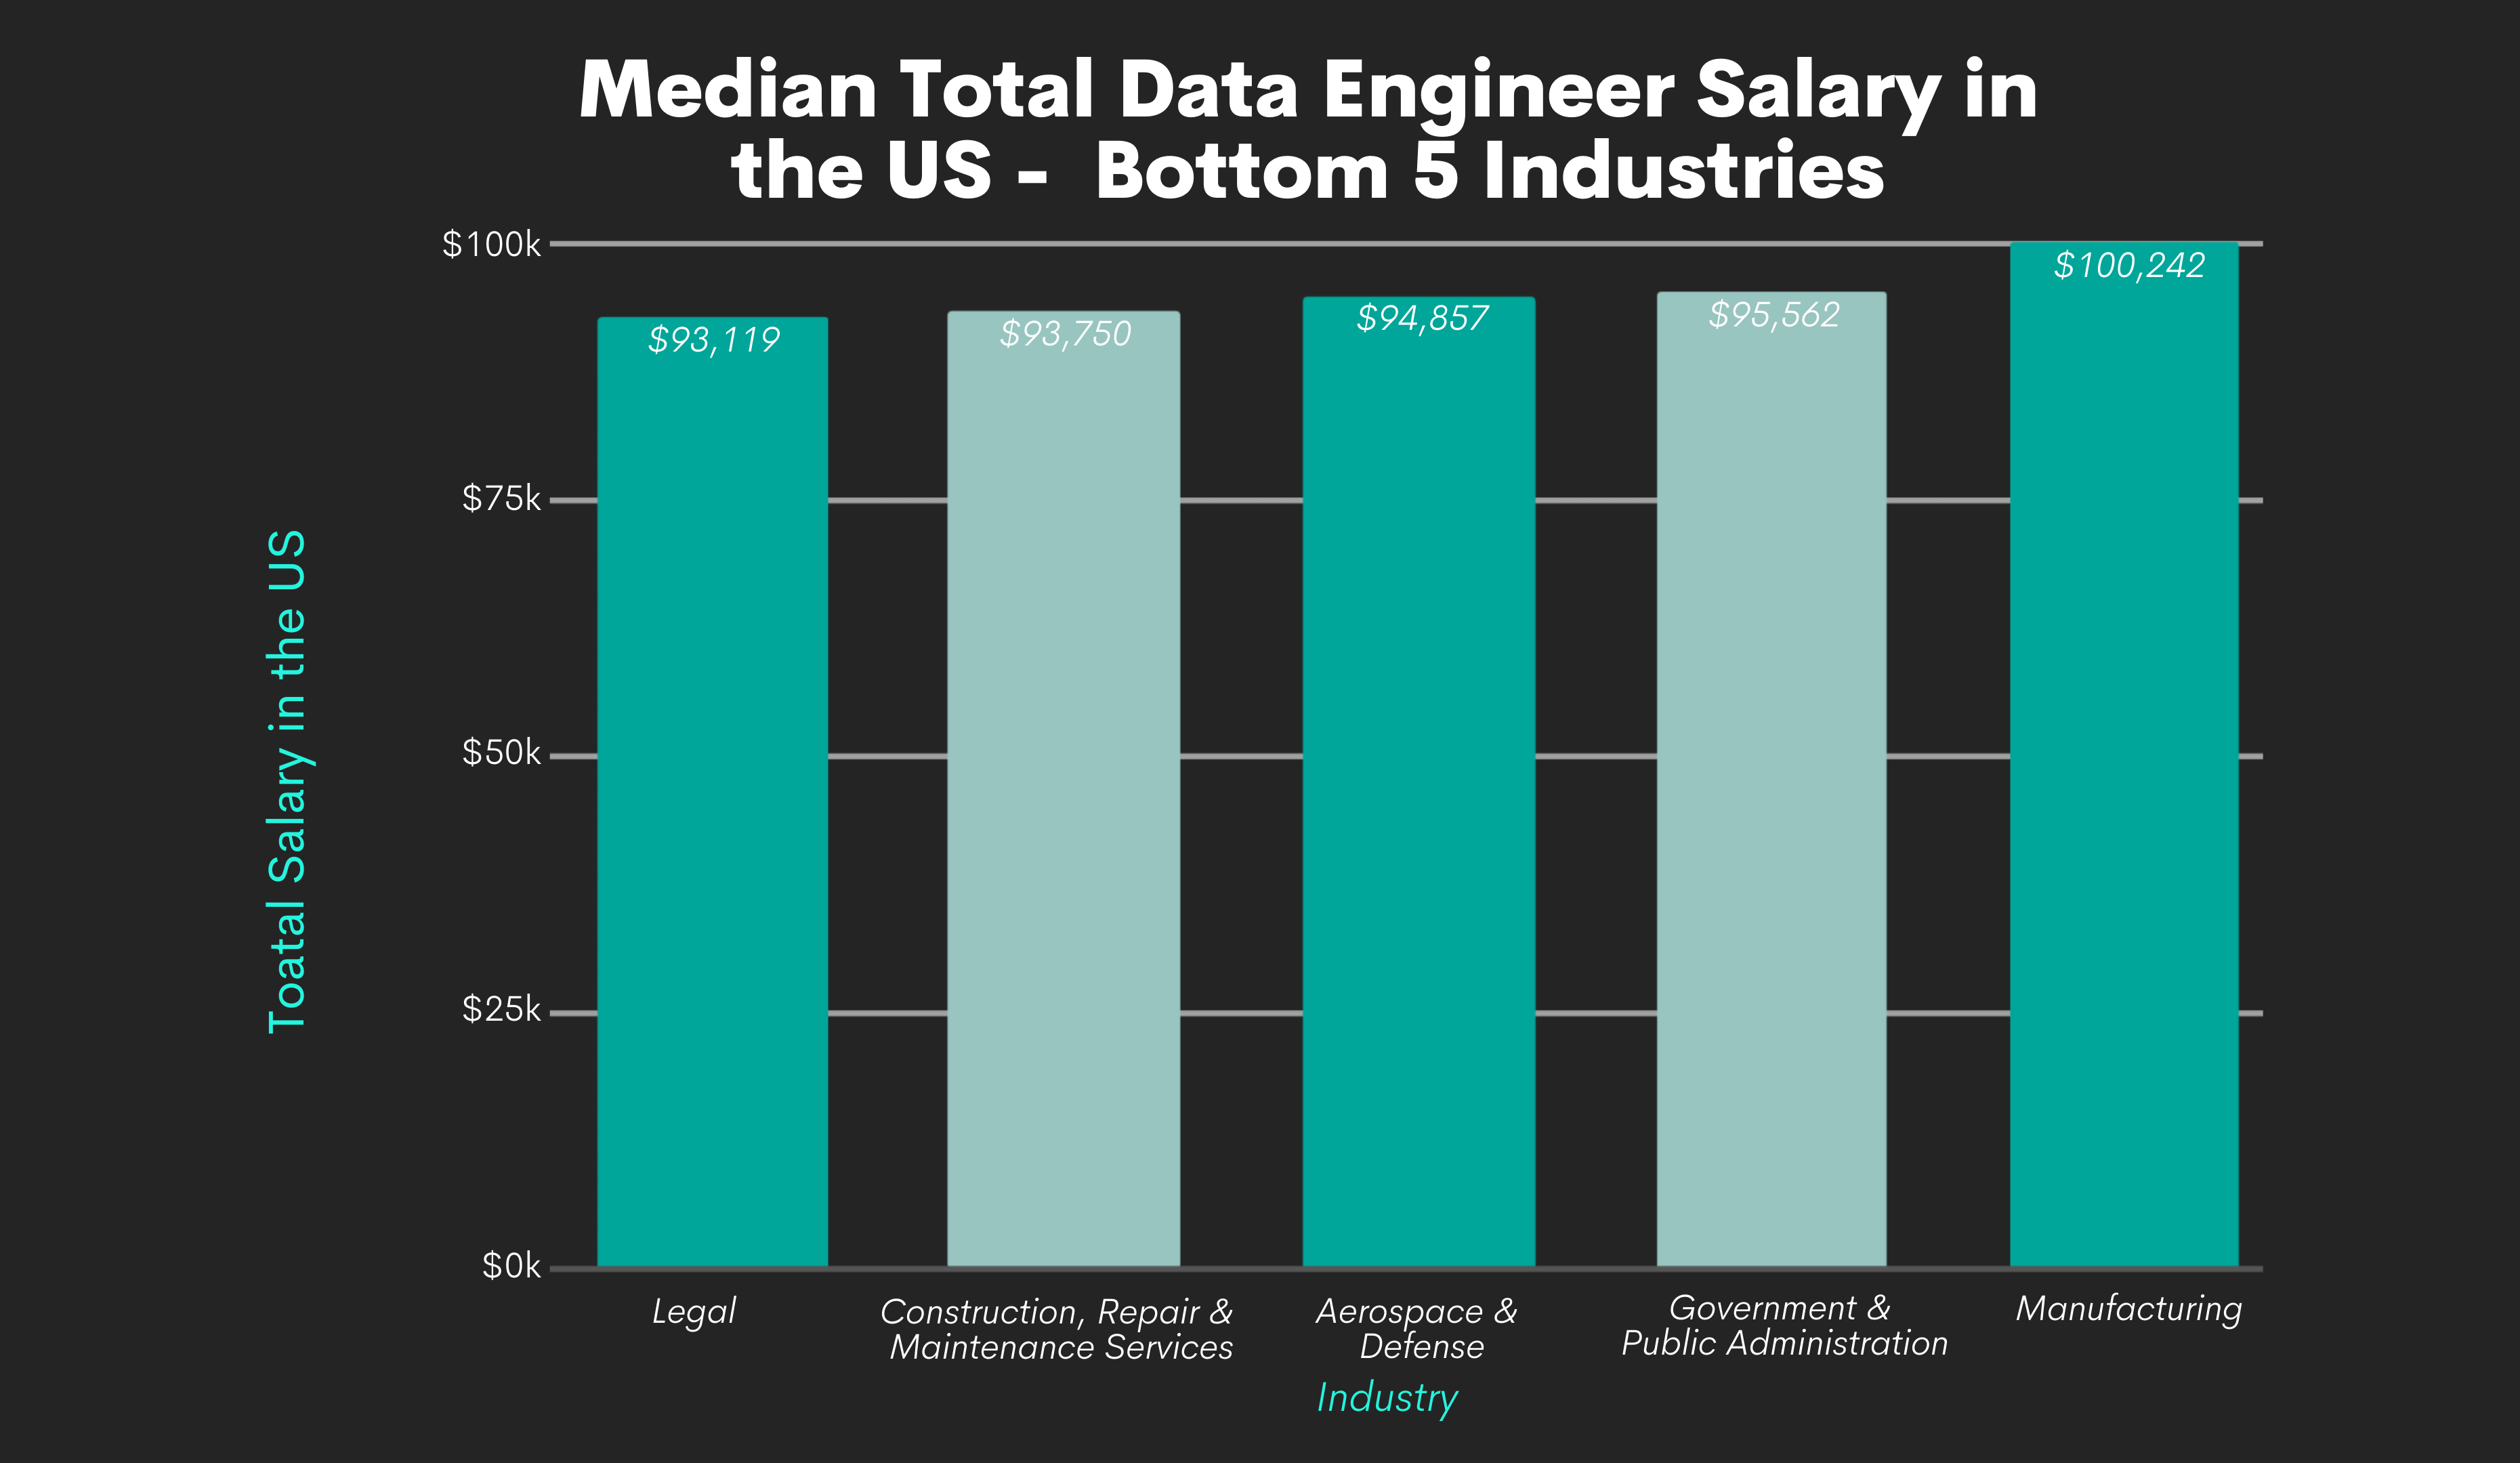 Total Data Engineer Salary by Bottom 5 Industries